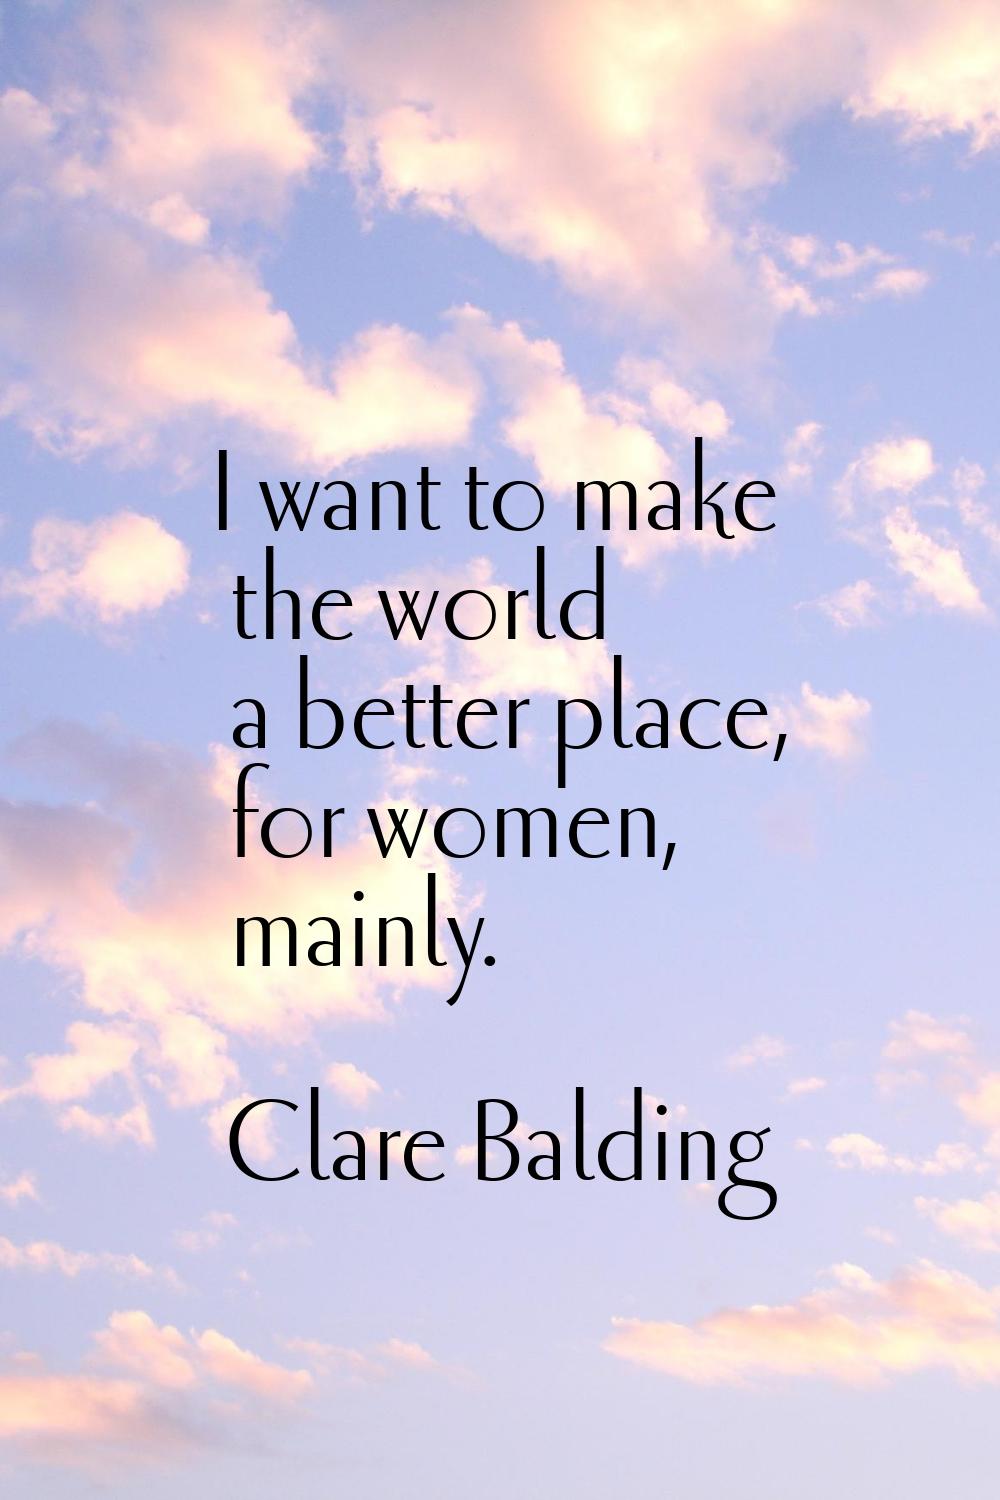 I want to make the world a better place, for women, mainly.